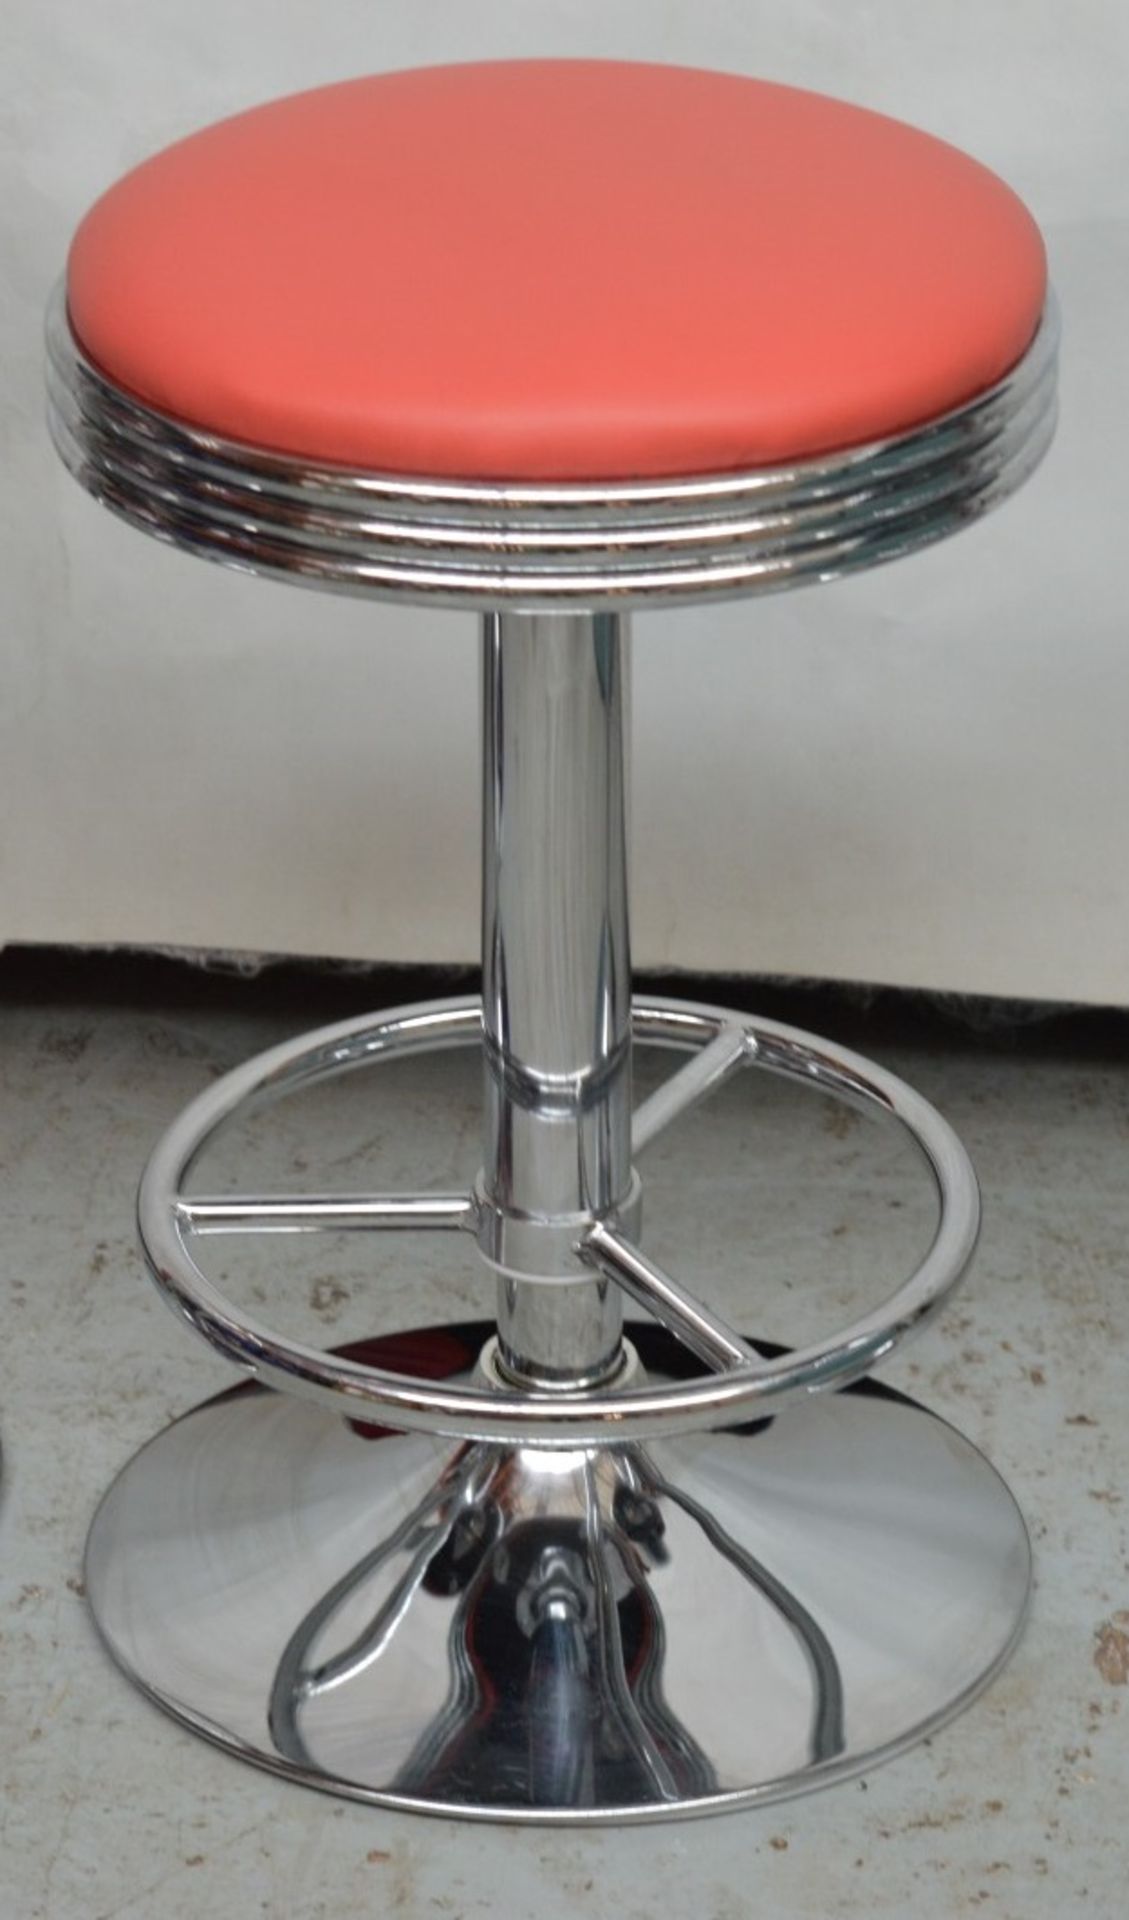 4 x Retro American Roadside Diner Themed Gas Lift Bar Stools - CL164 - Fantastic Stools With Full - Image 11 of 14